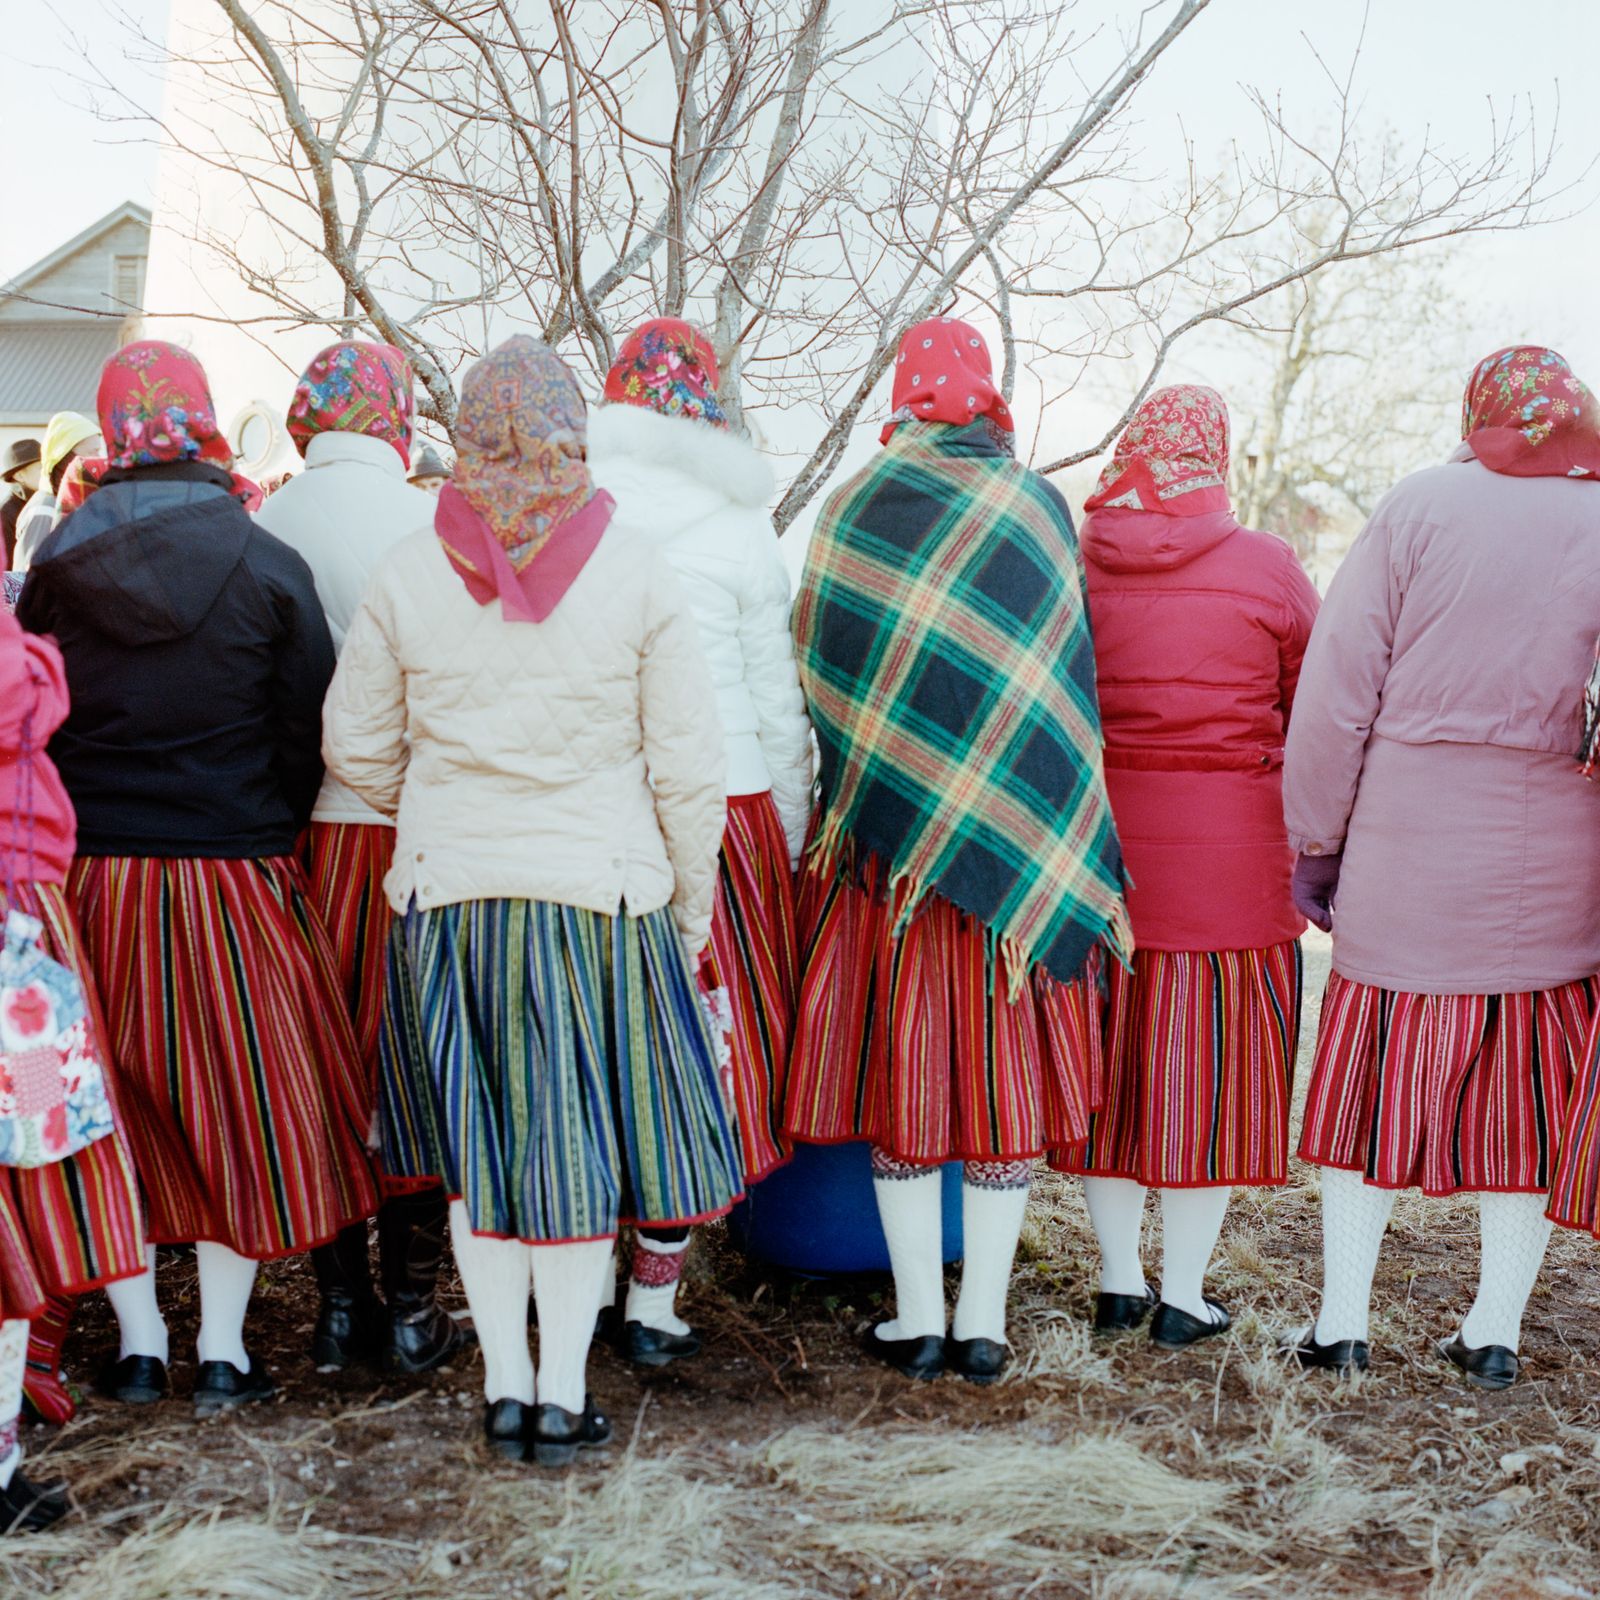 © Jérémie Jung - Image from the Kihnu, the Isle off the Time photography project